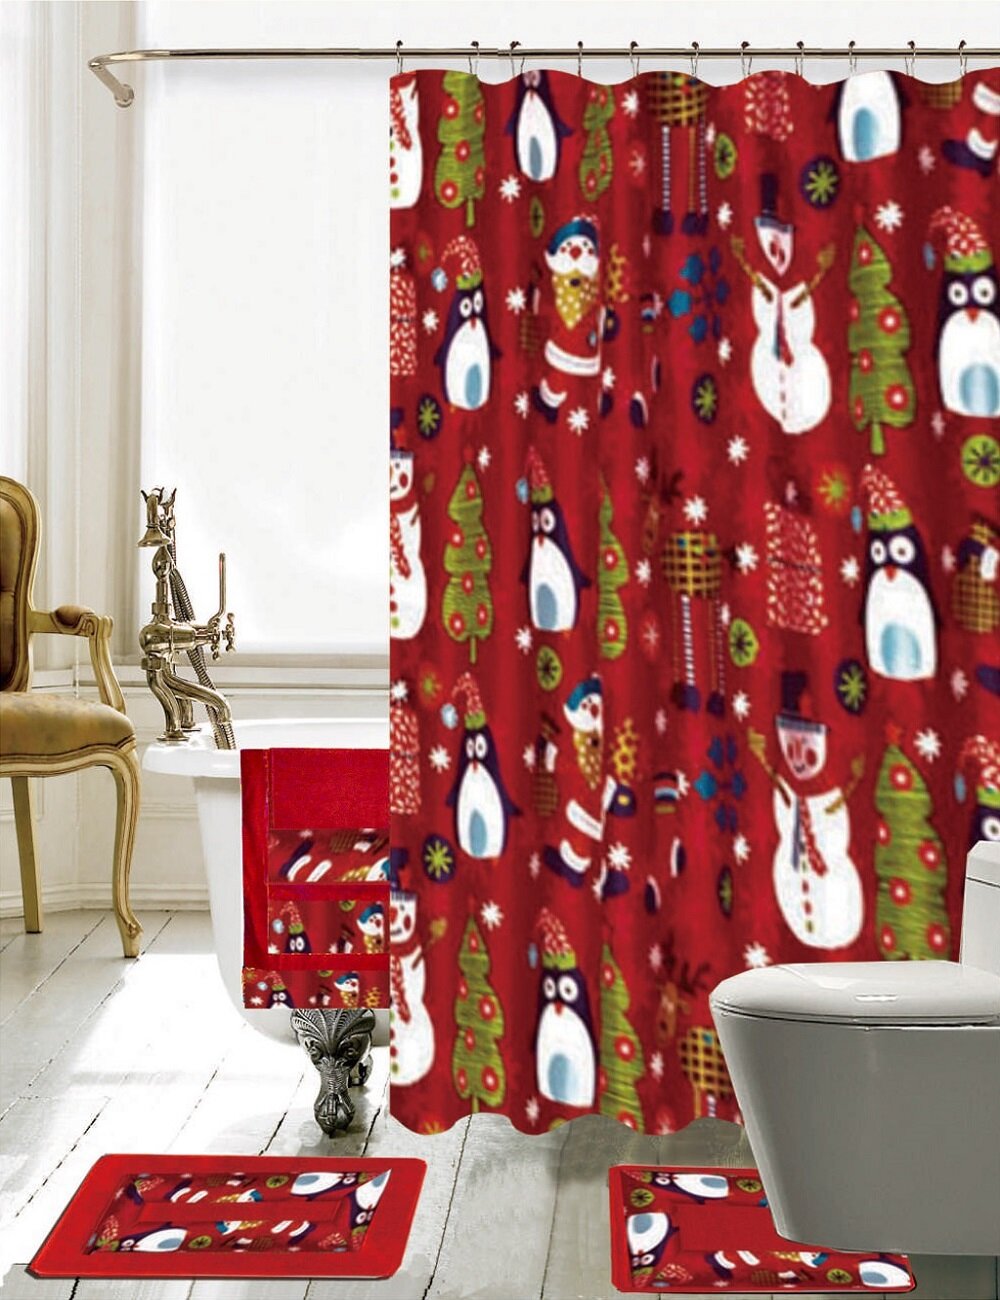 Sequin Shower Curtain 70x70 Shining Stripe Holiday Bathroom Decor Coco - Red